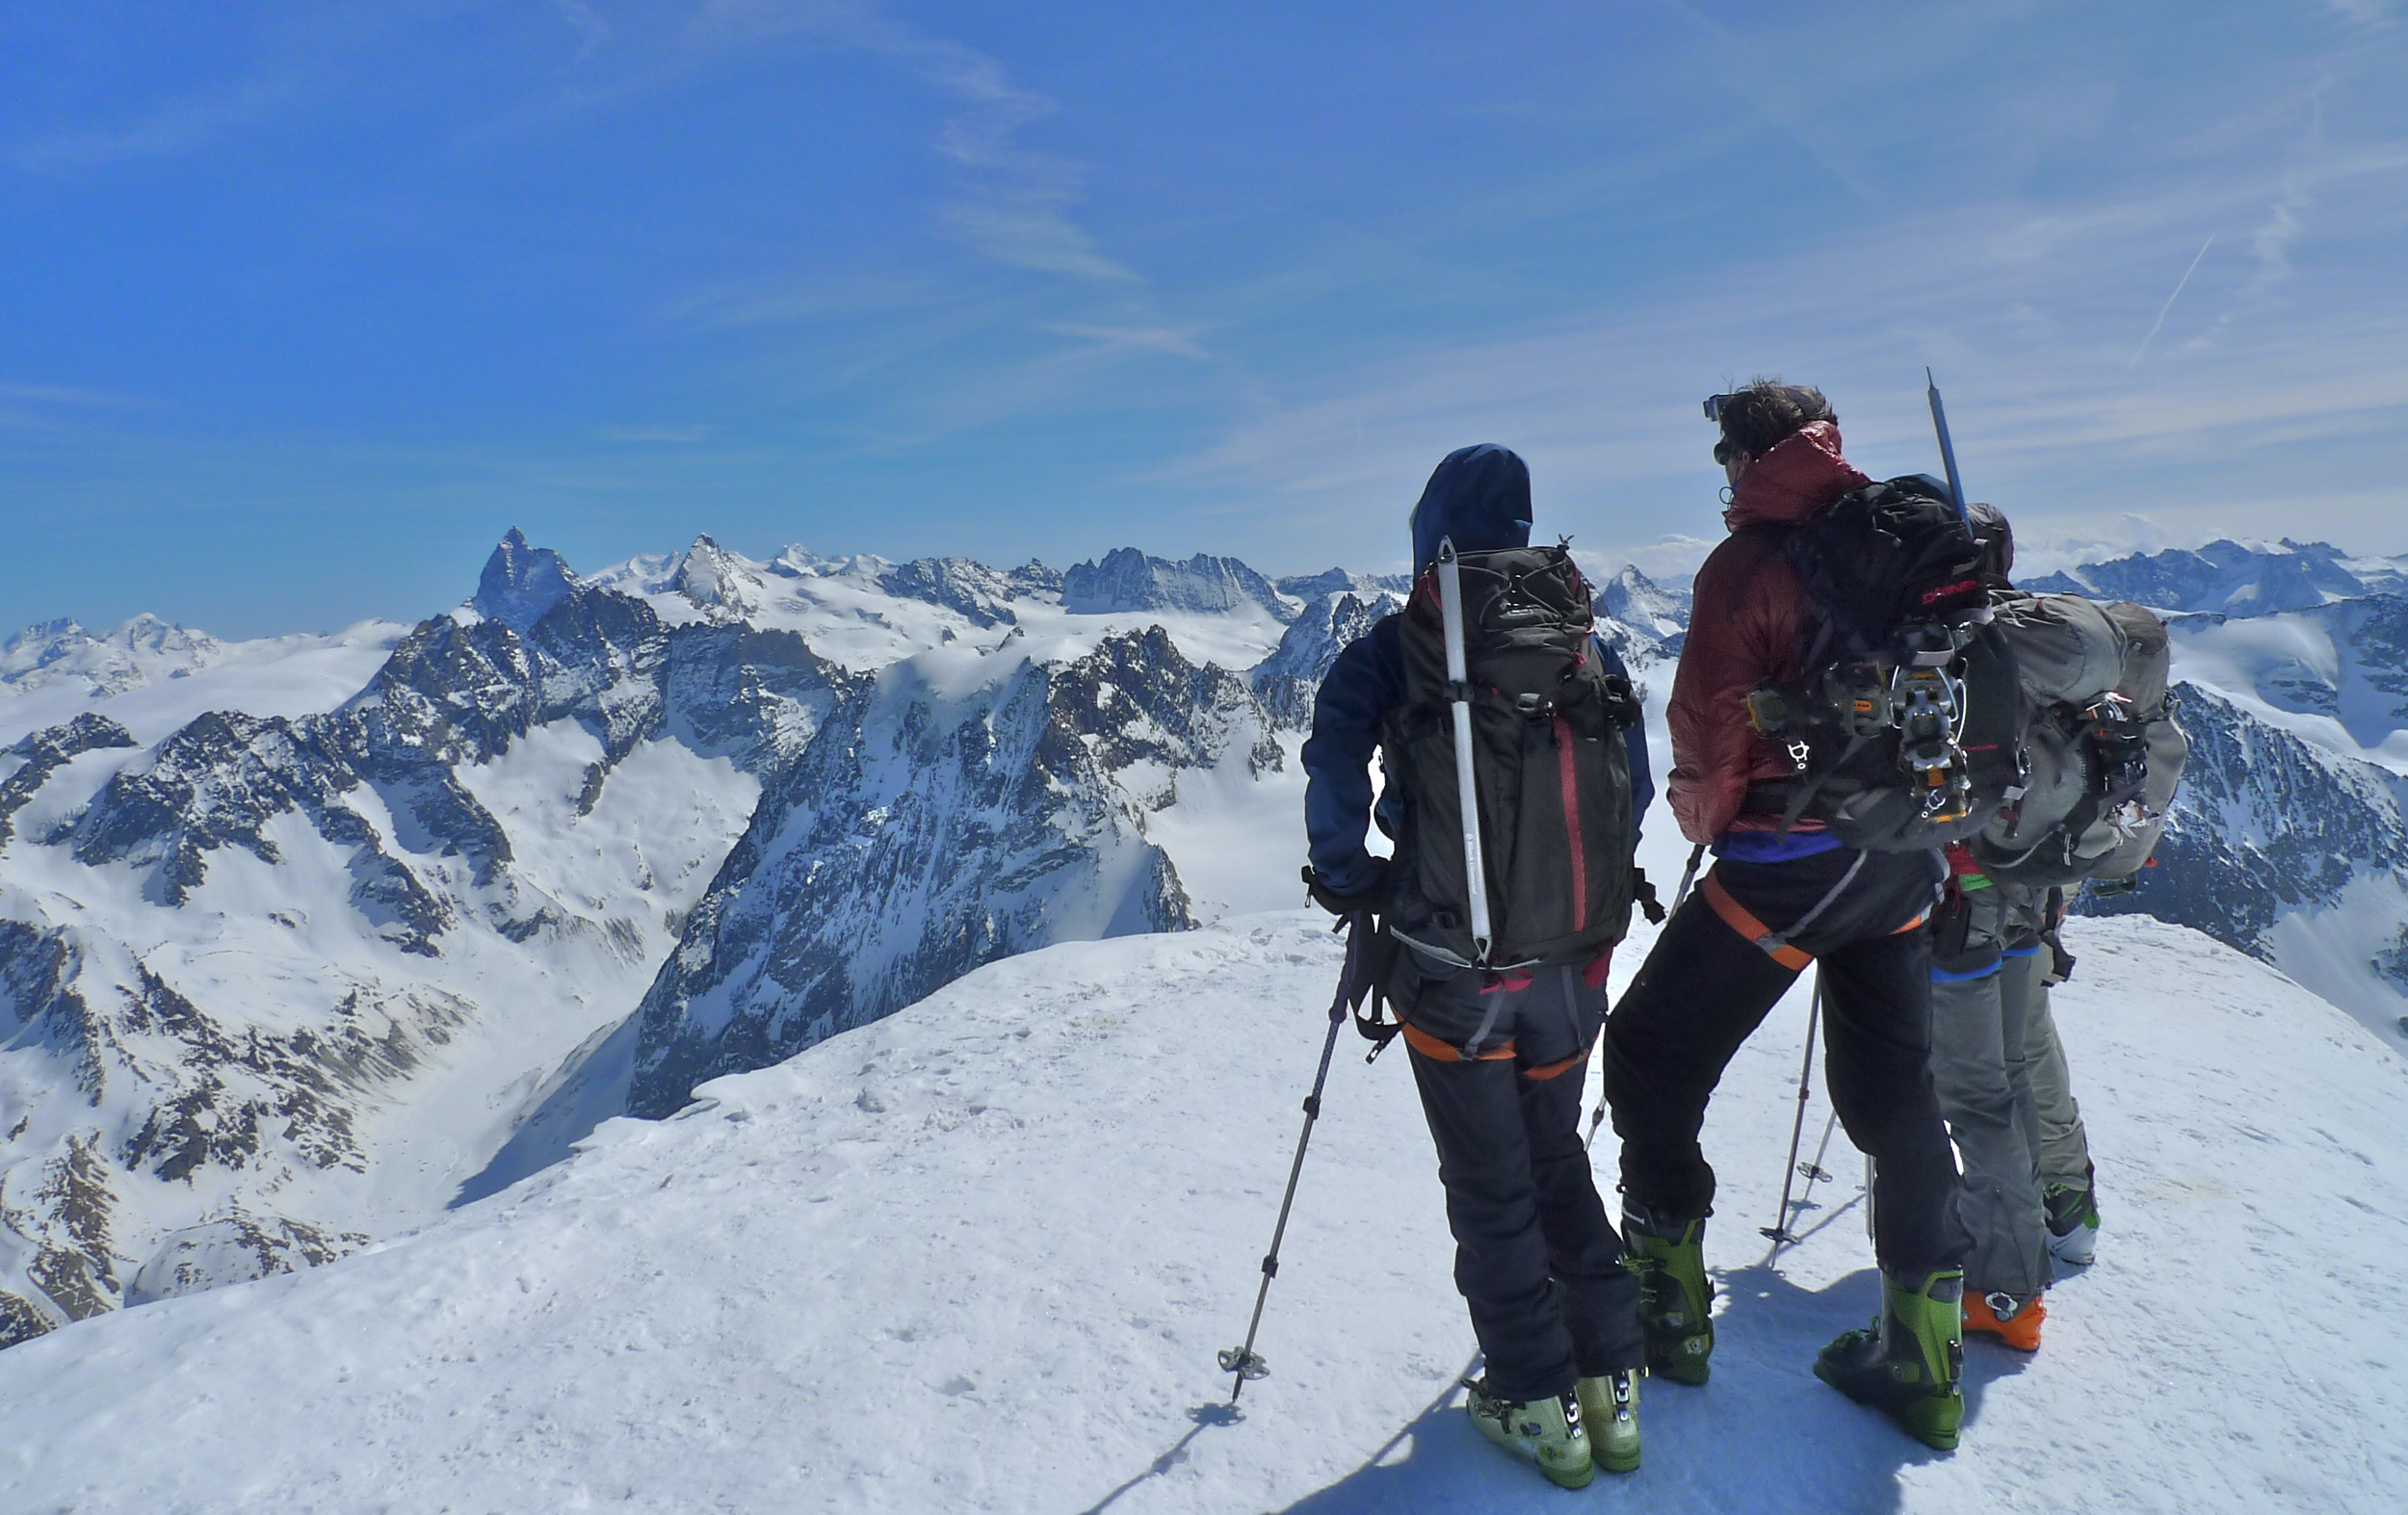 Day 5: On top of the Pigne d'Arolla